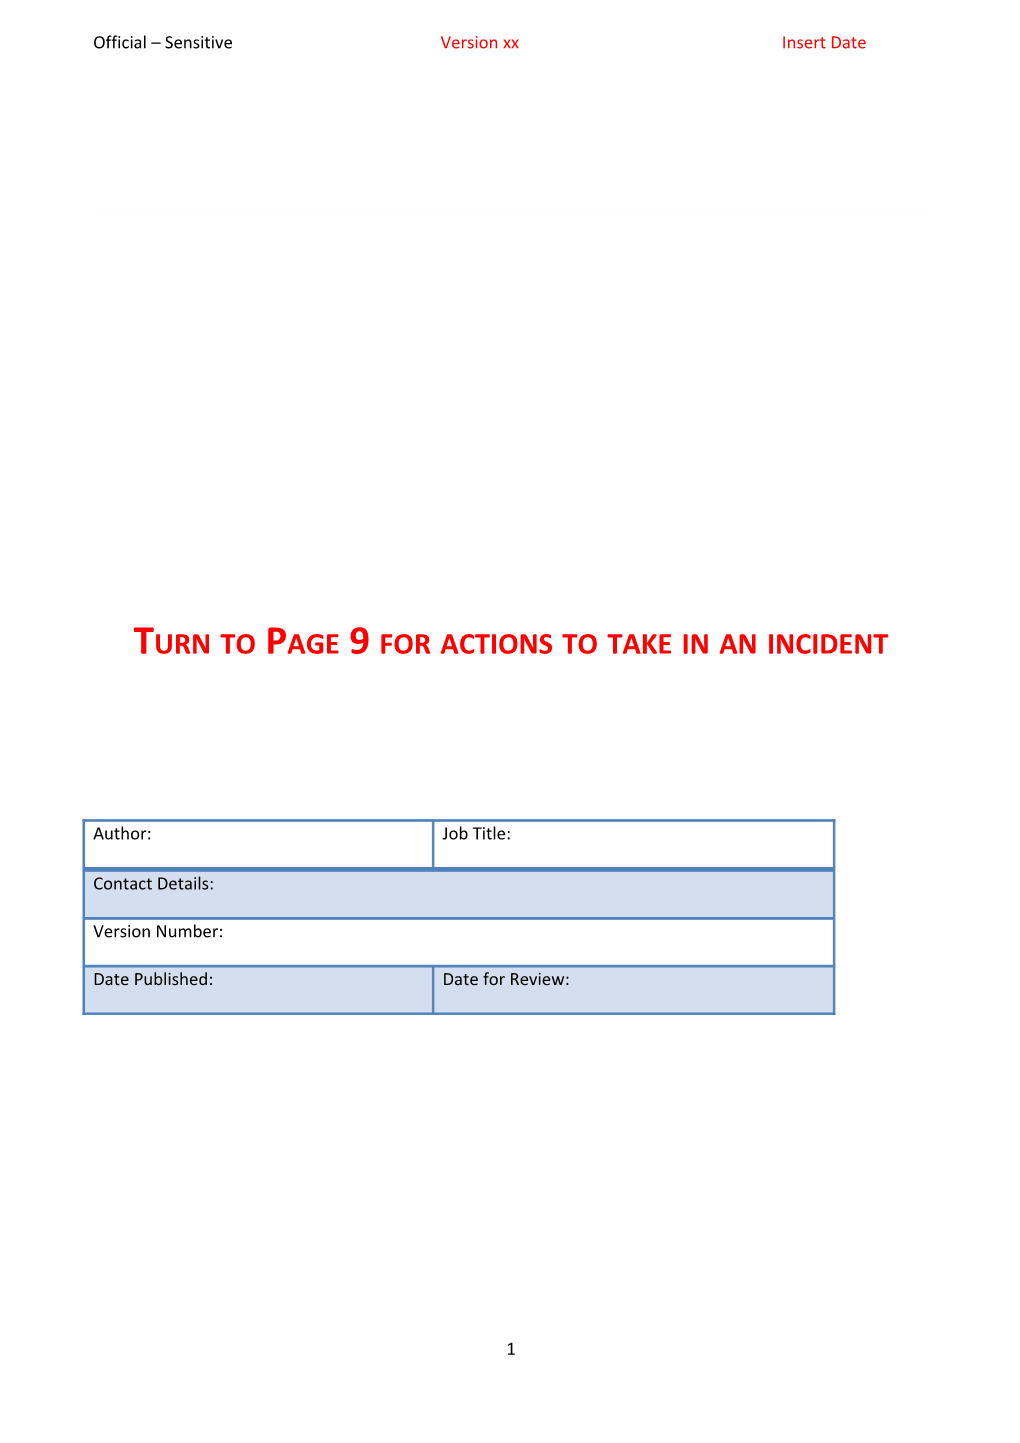 Turn to Page 9 for Actions to Take in an Incident